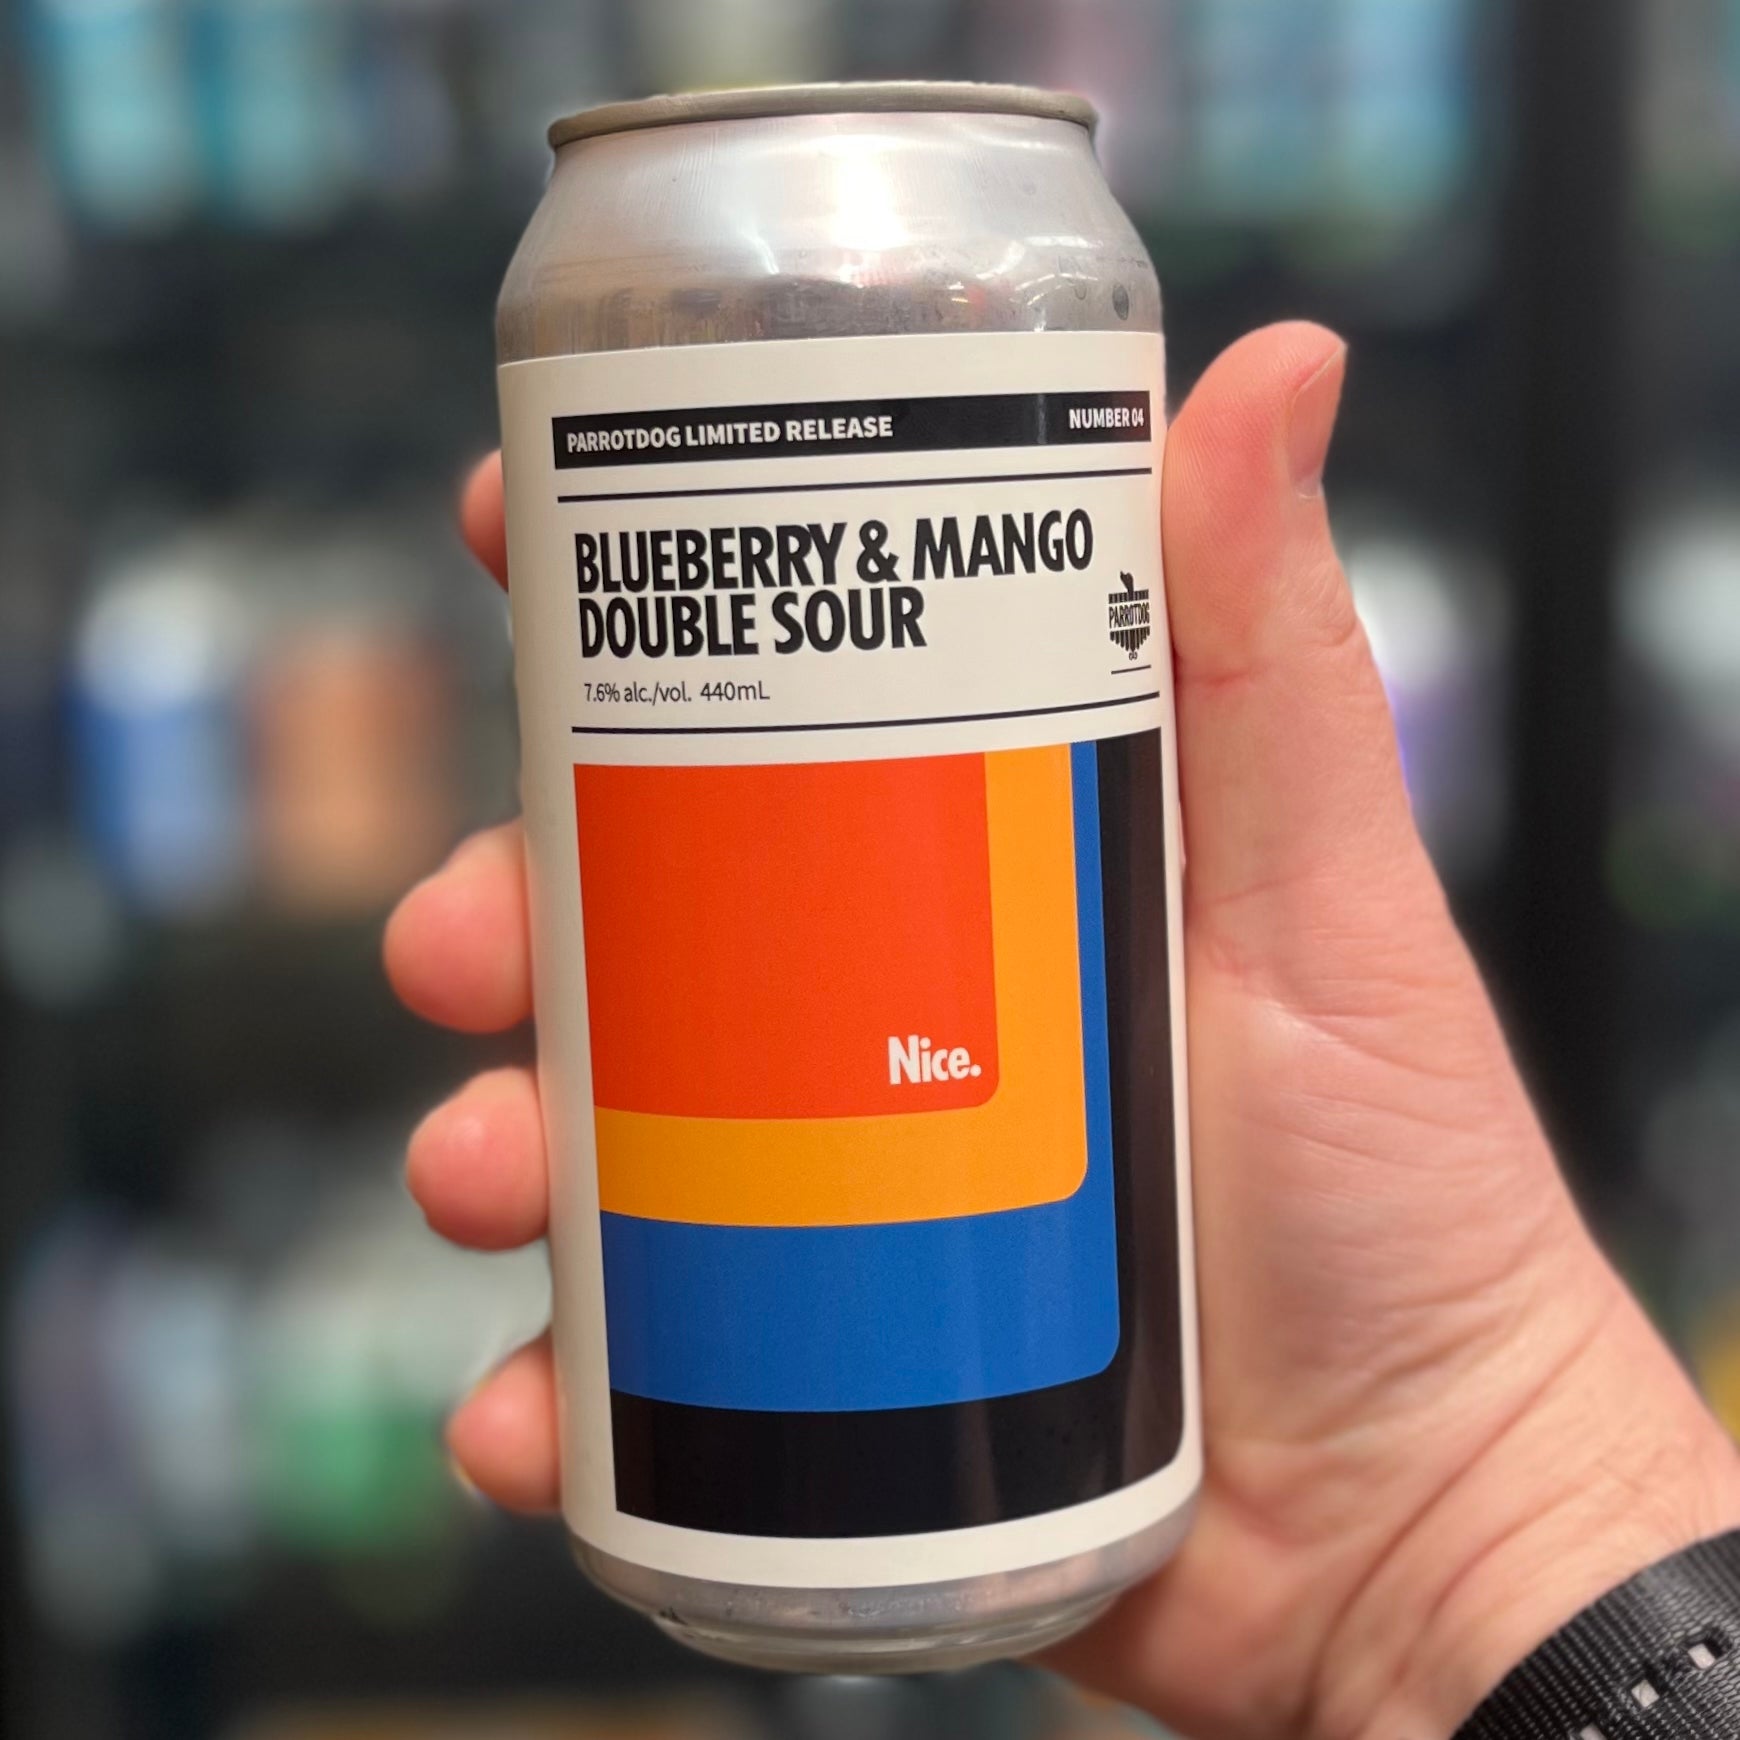 ParrotDog Parrotdog Limited Release Number 04 Blueberry & Mango Double Sour Sour/Funk - The Beer Library